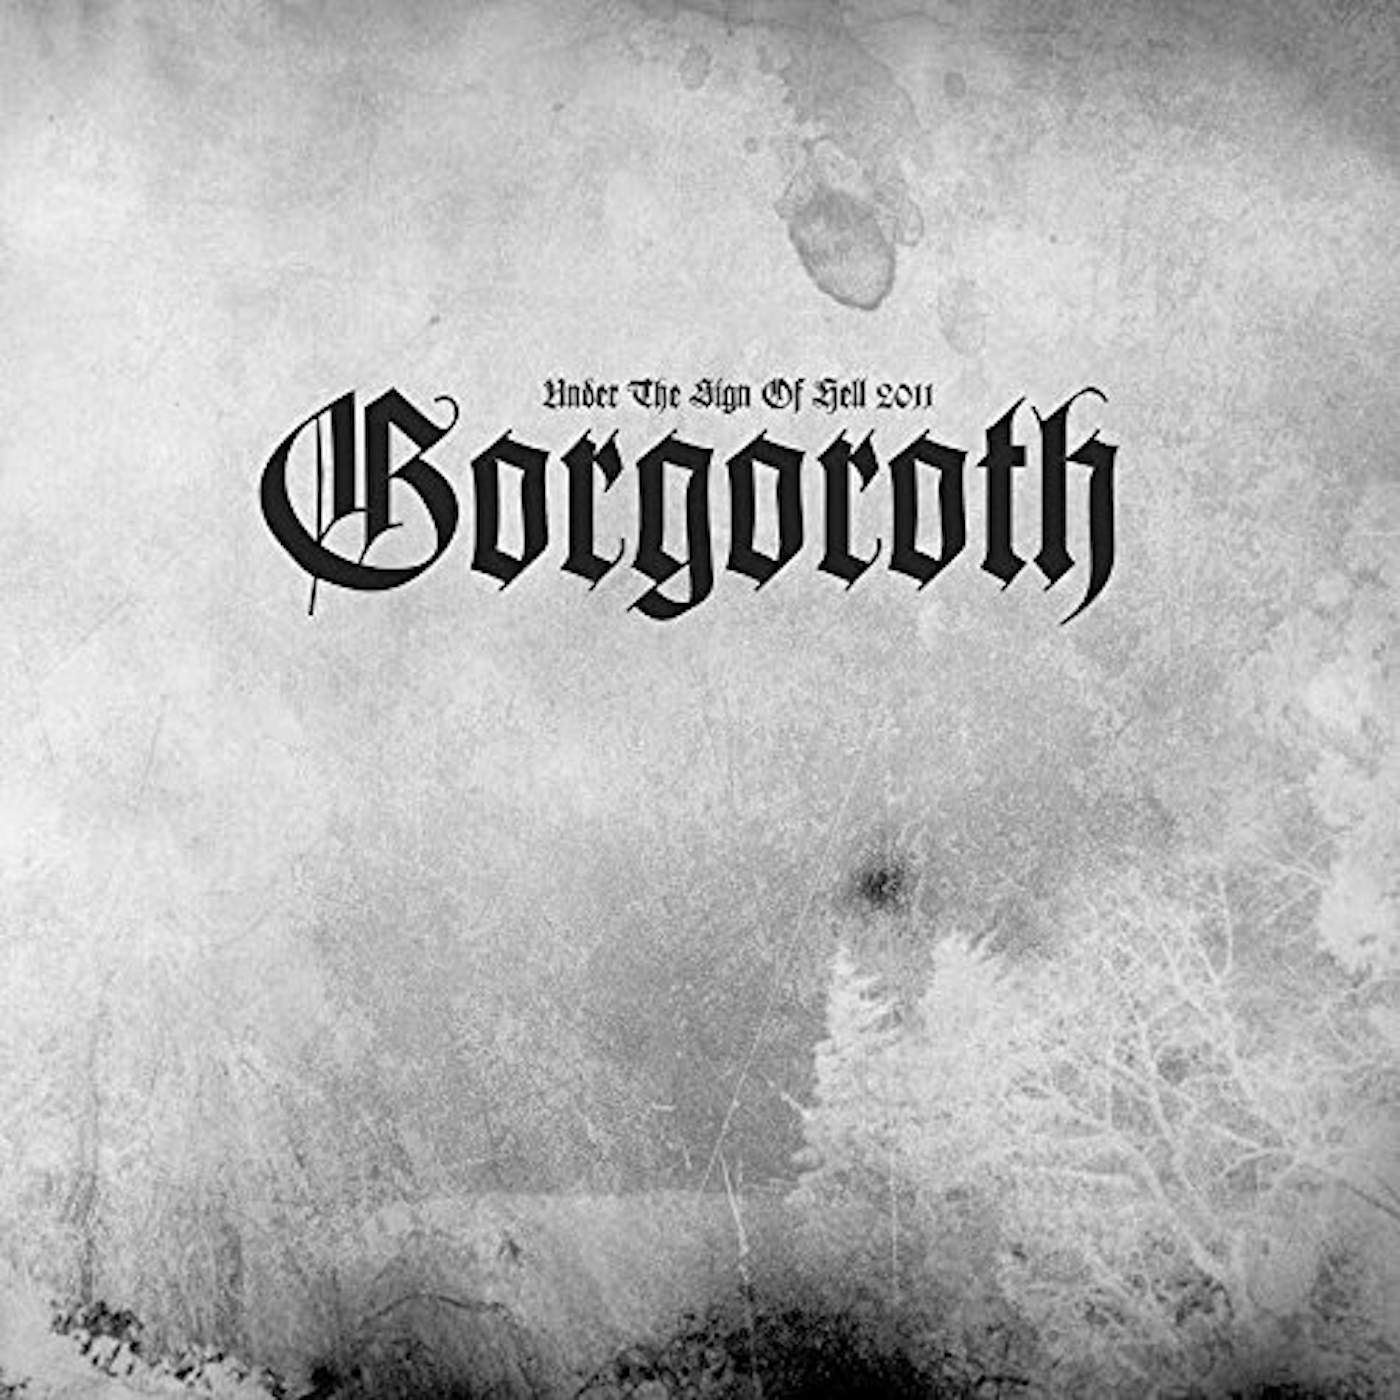 Gorgoroth UNDER THE SIGN OF HELL 2011 CD